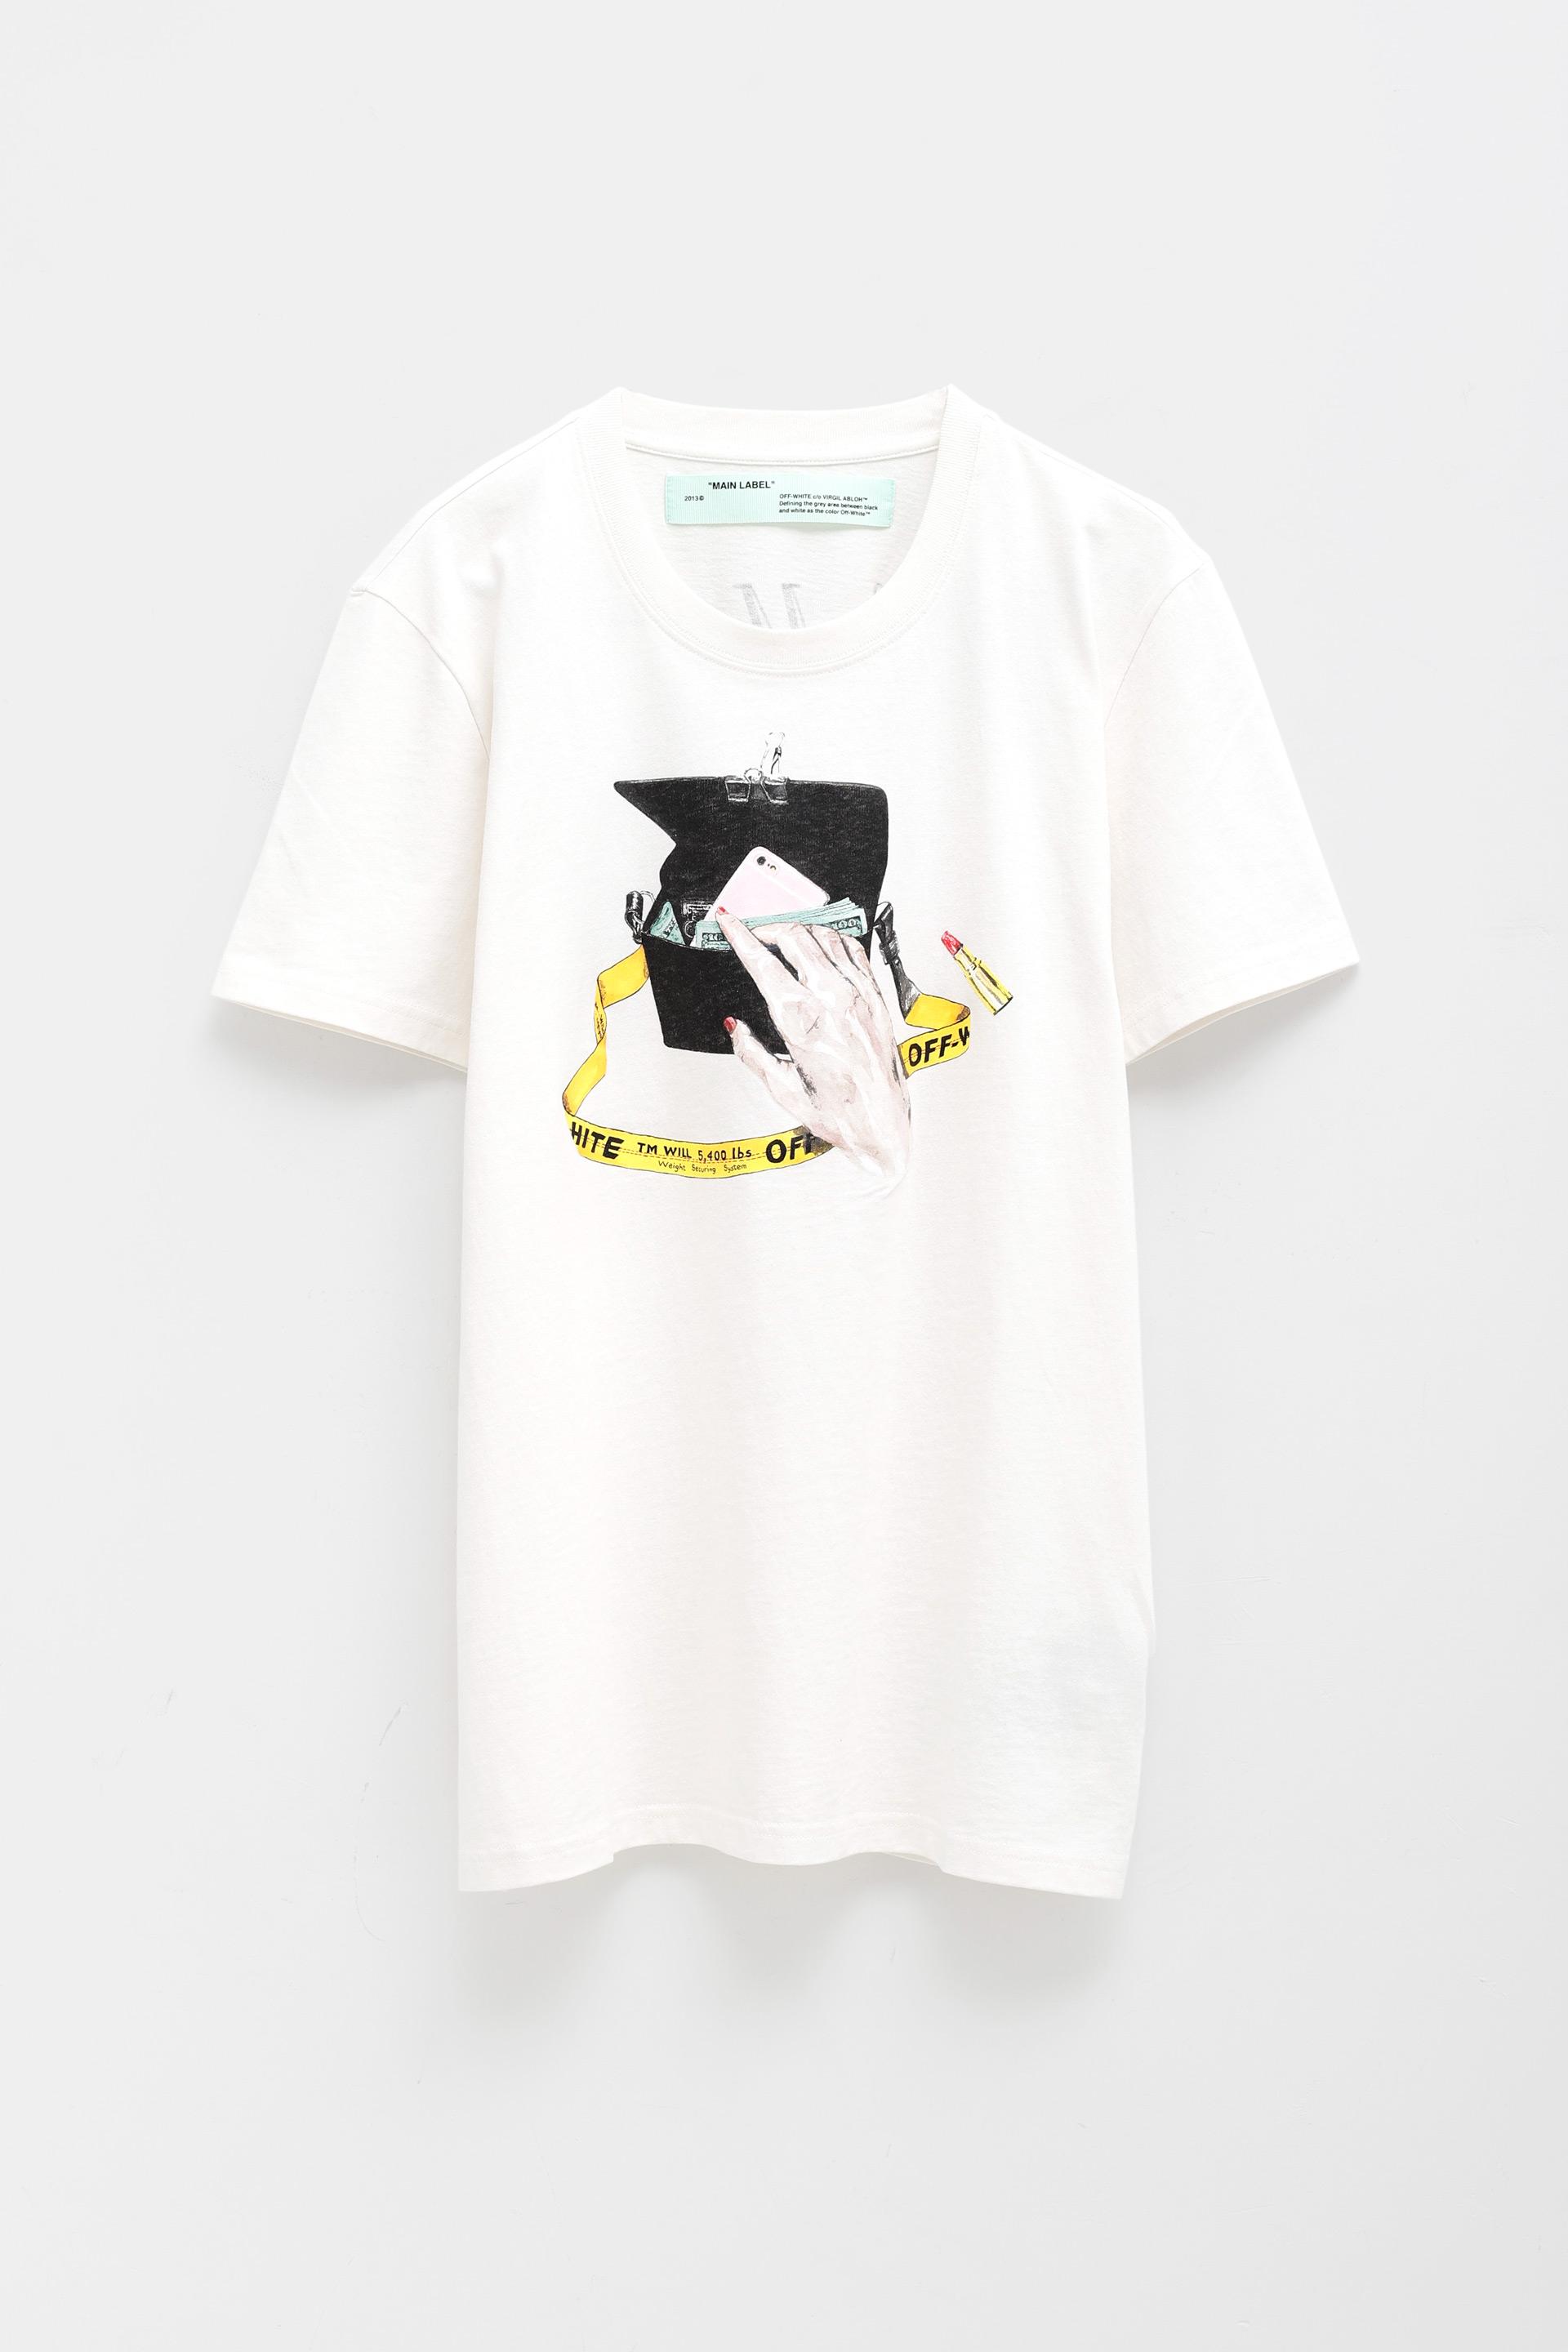 Off-White c/o Virgil Abloh Cotton Graphic Print T-shirt in Black - Lyst